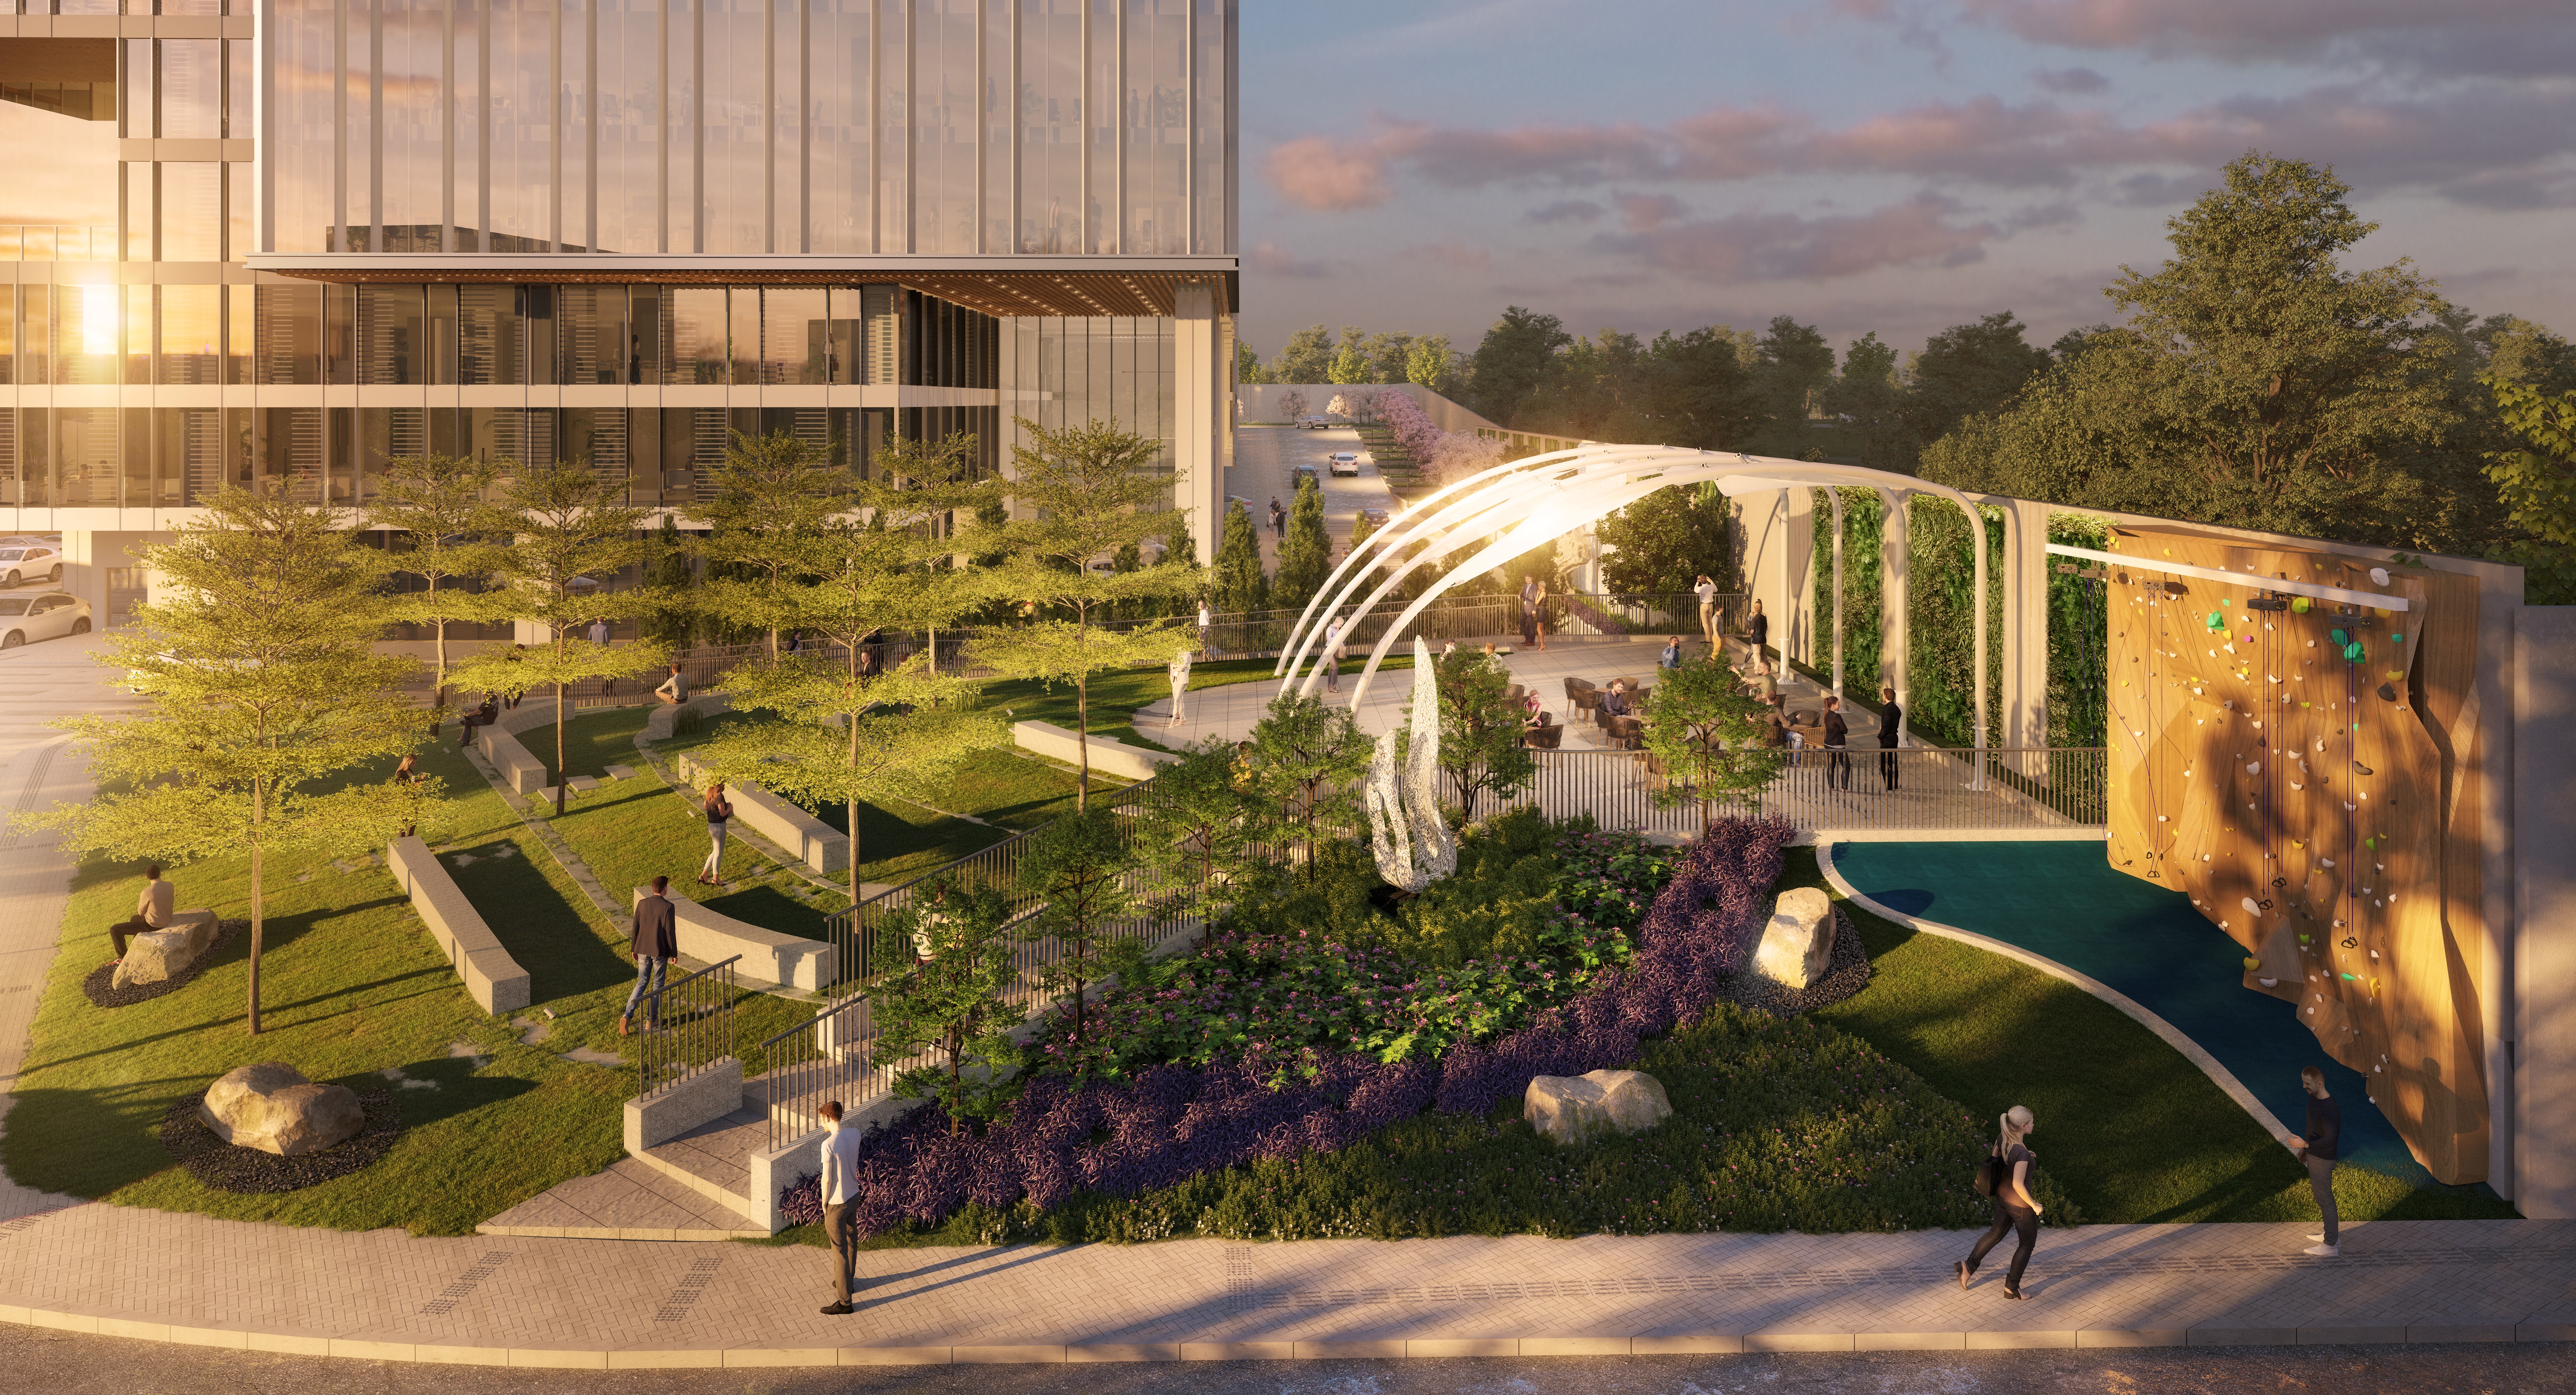 Ecoworld 4D campus and outdoor space at dusk